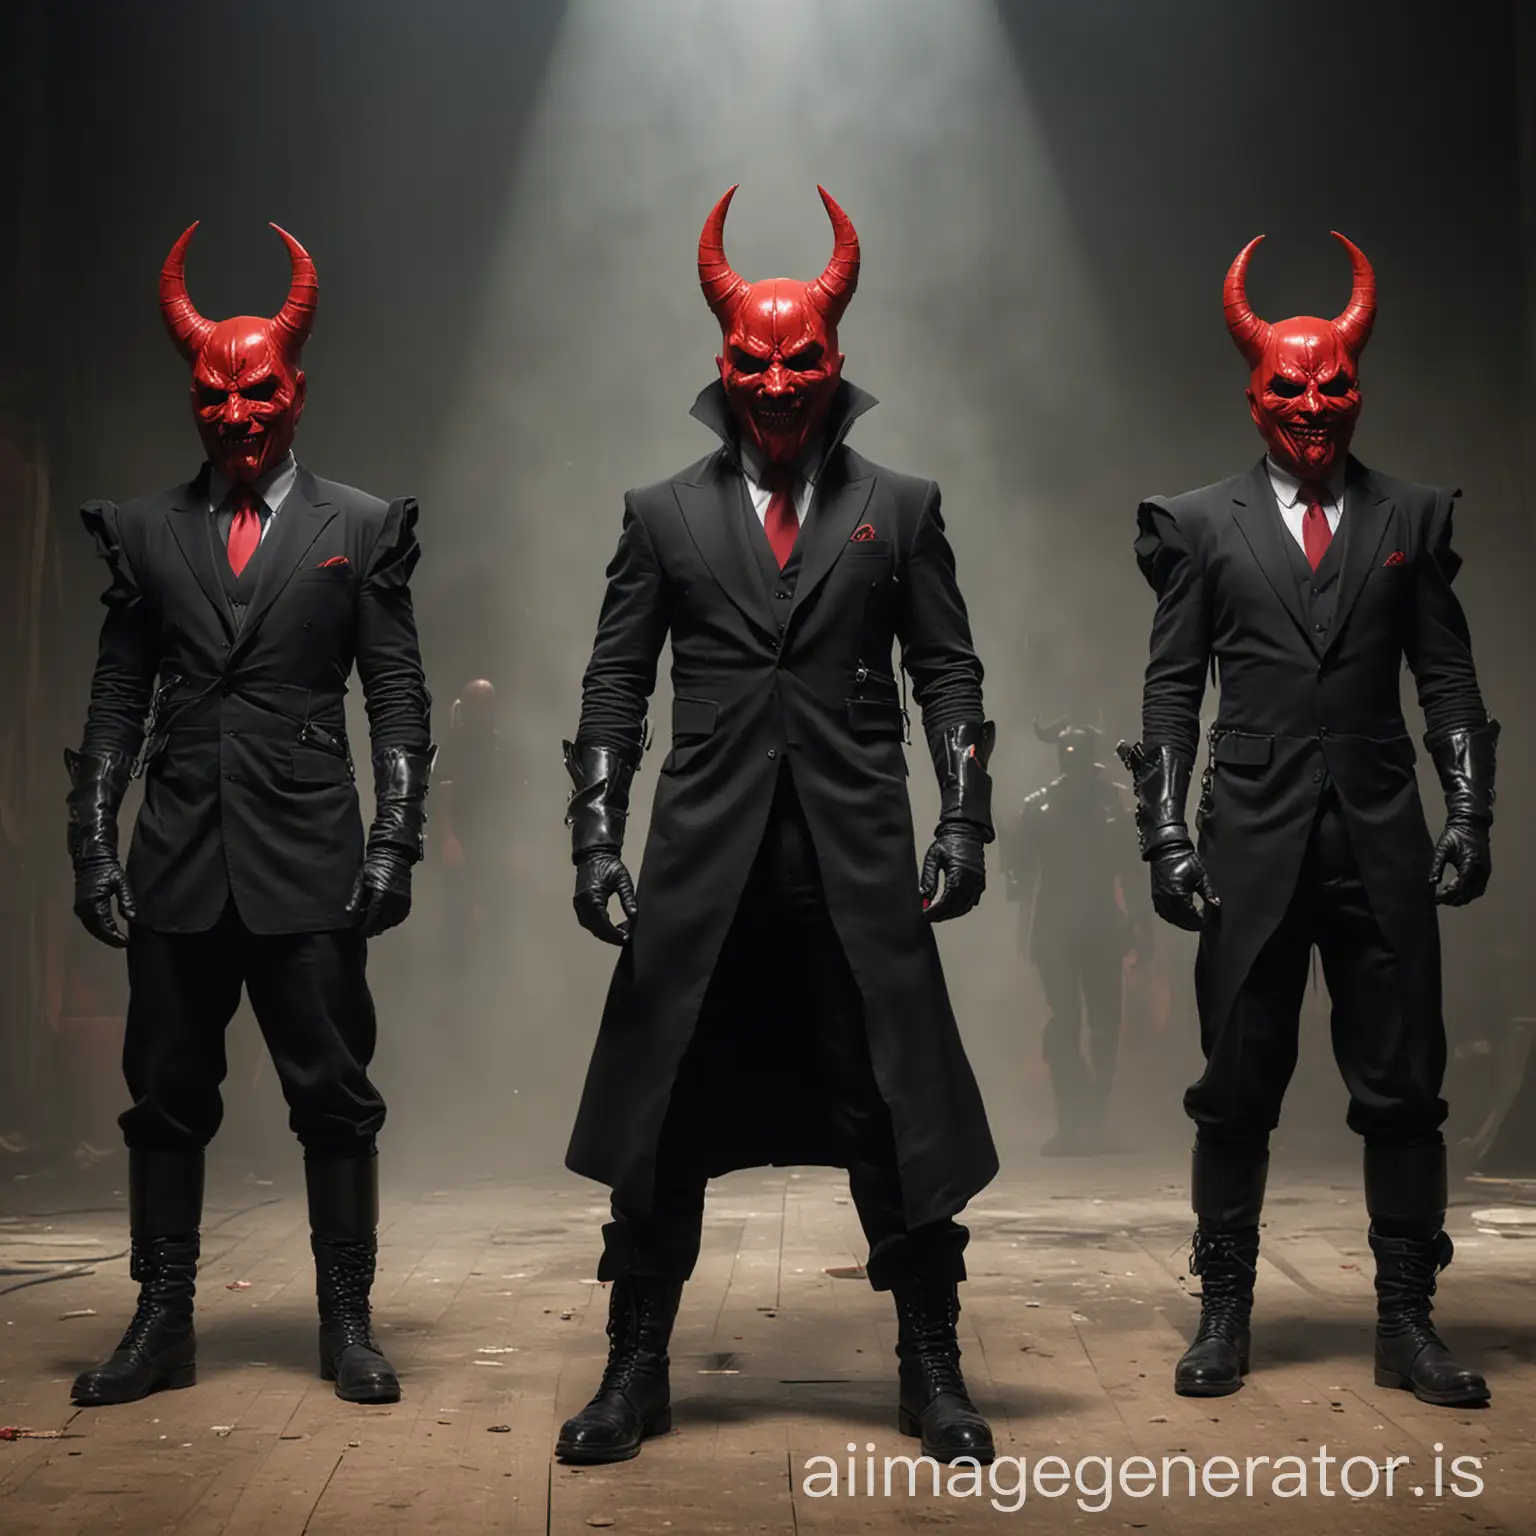 Towering-Man-in-Black-with-Red-Devil-Mask-and-Bodyguards-on-Stage